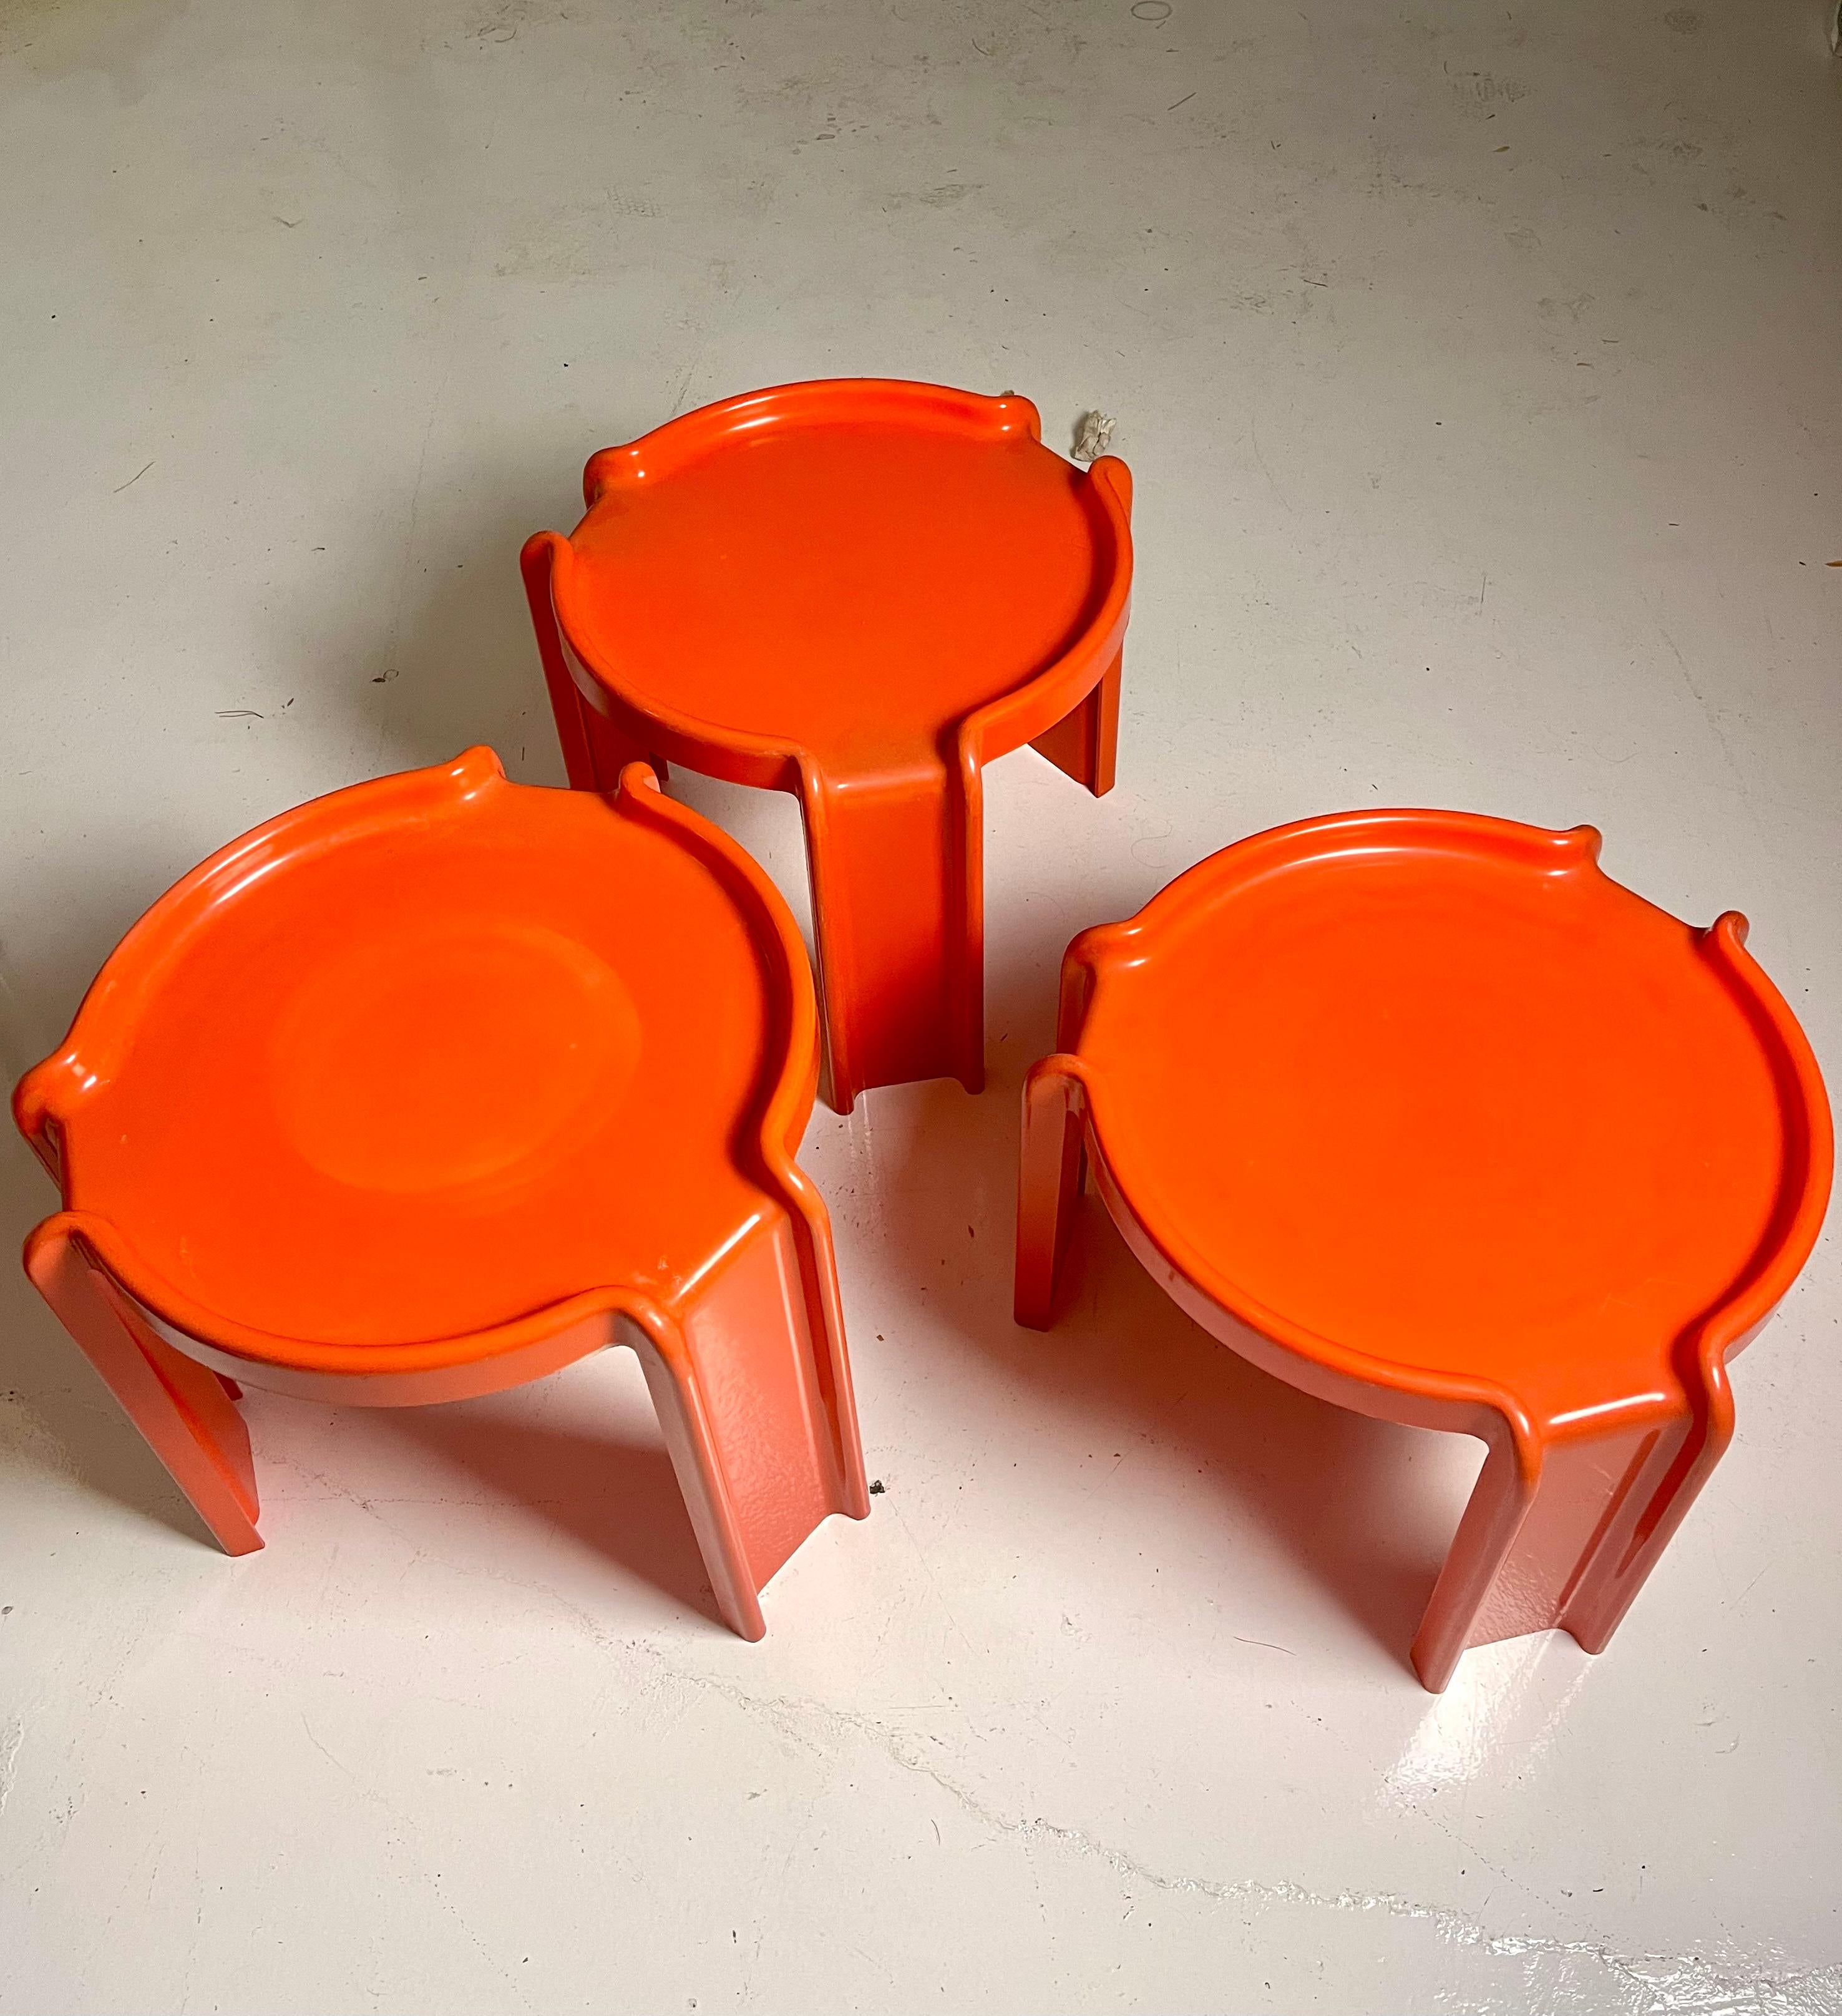 Full set of 3 stacking tables by Giotto Stoppino for Kartell in a rare orange plastic. Surprisingly substantial and in good vintage condition with minor scuffs and fading.